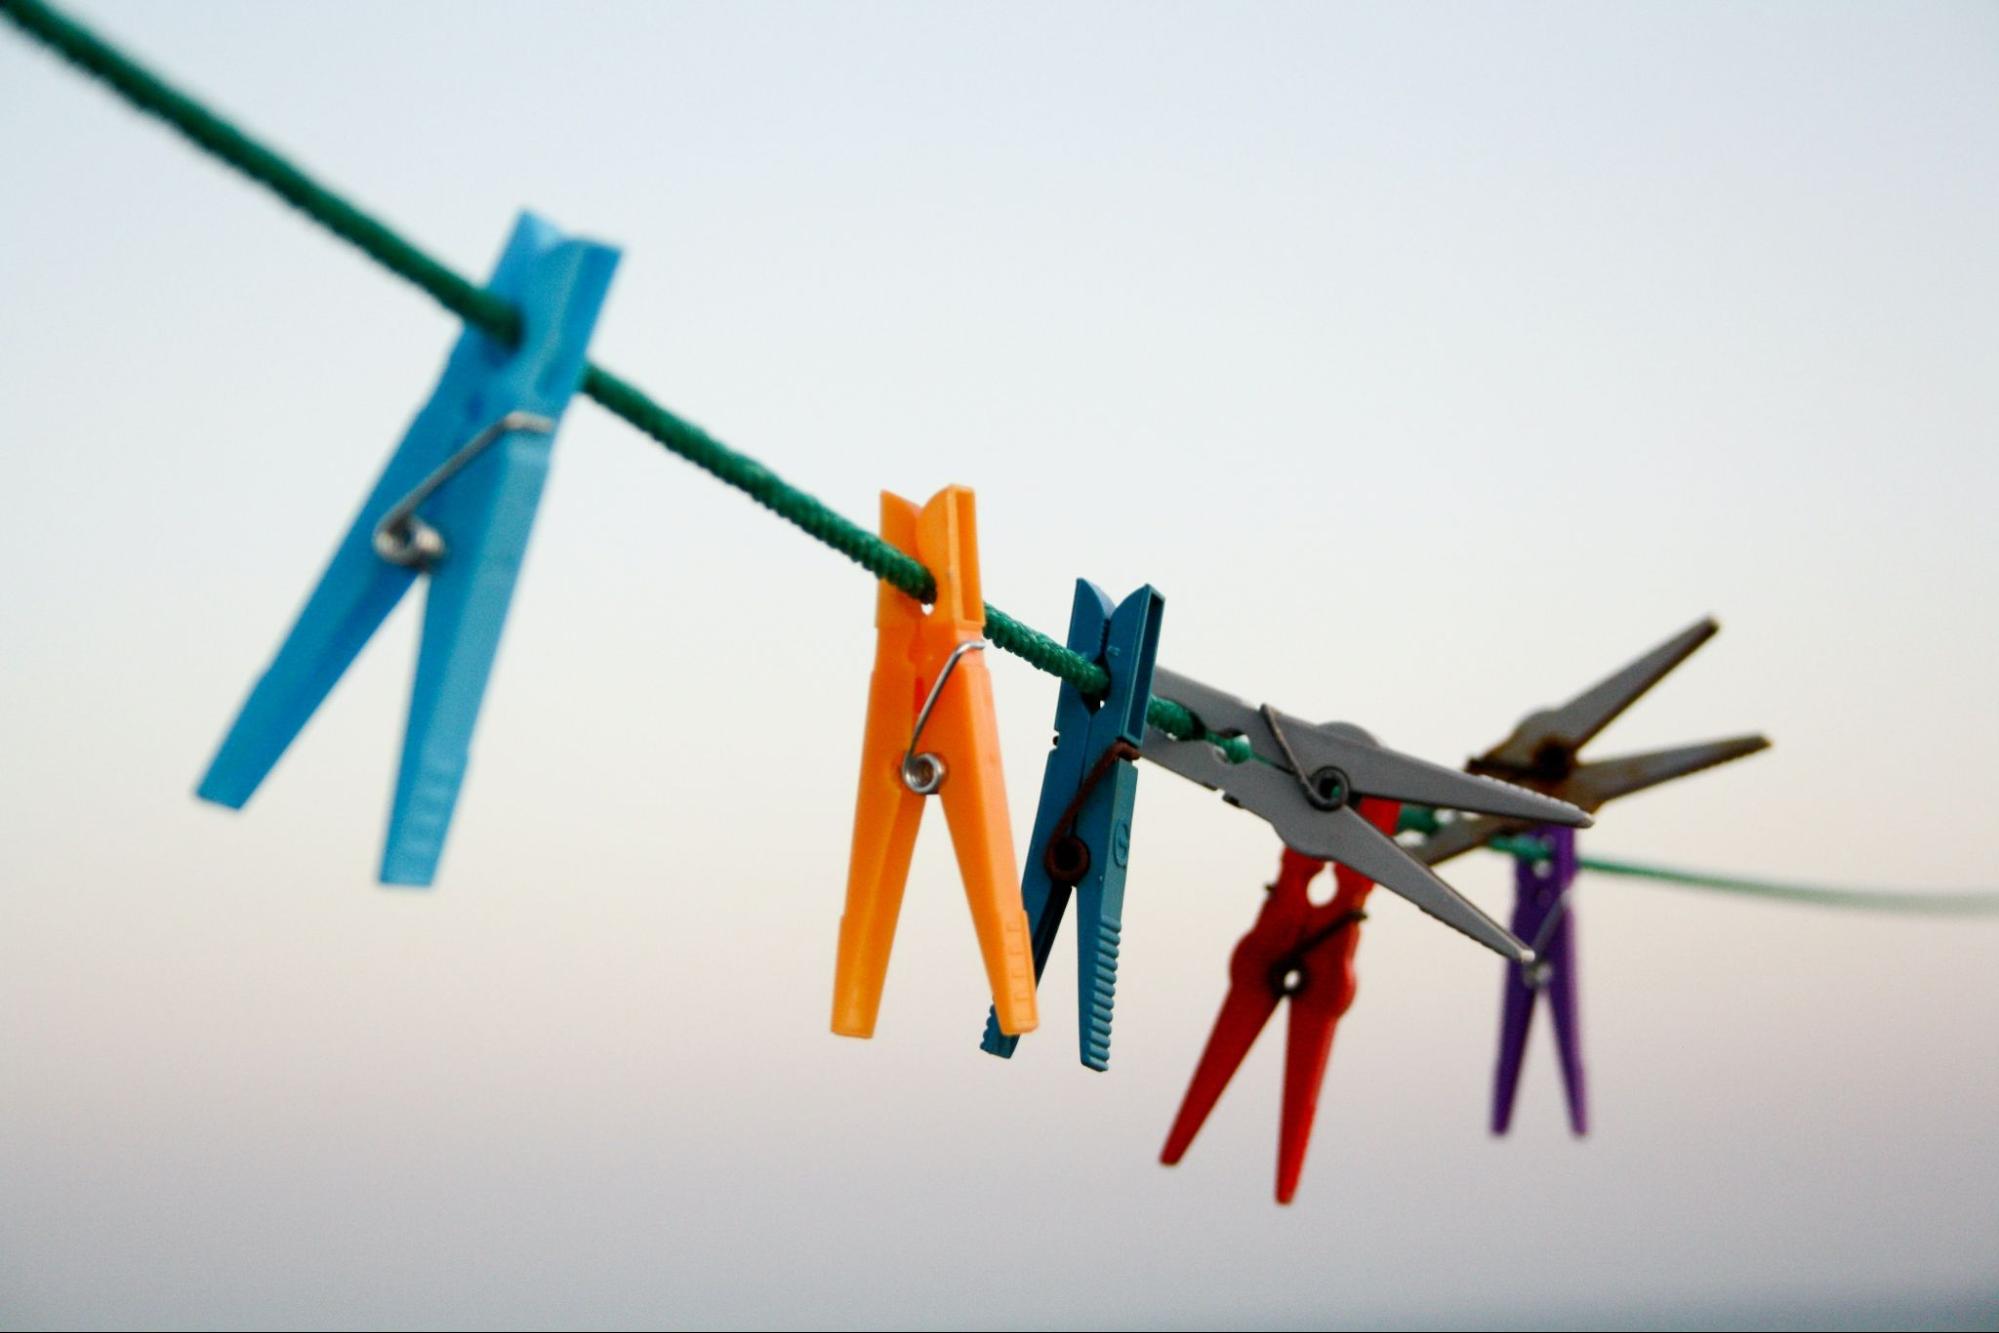 7 different coloured pegs hanging from a line